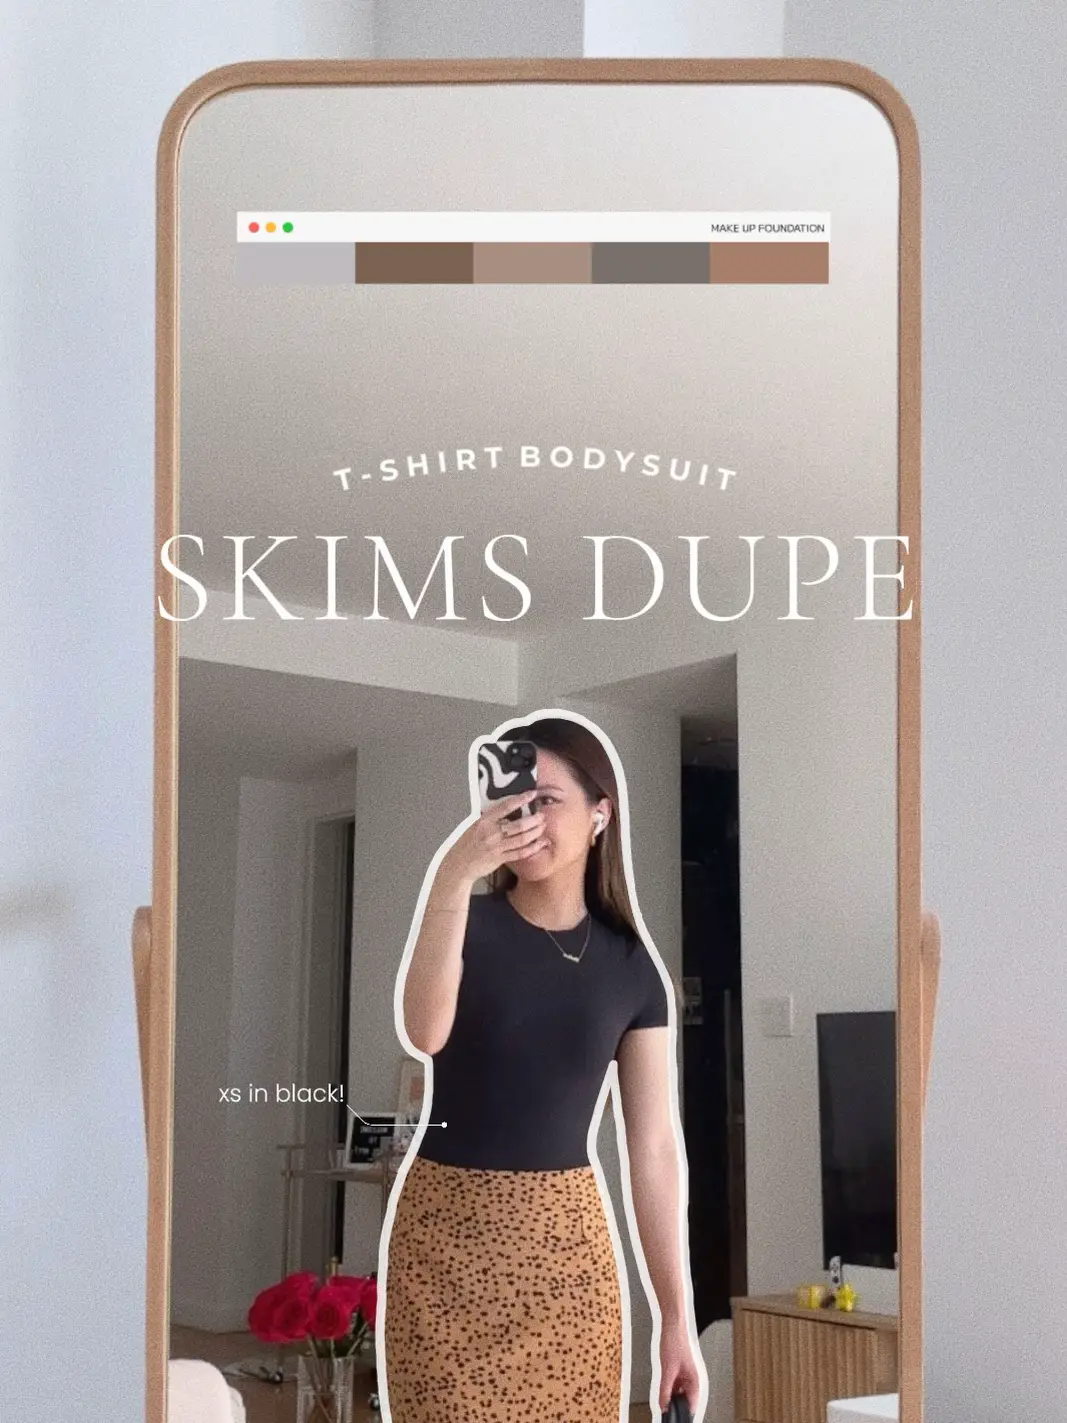 SKIMS DUPE - Bodysuit Review  Skims VS. Shein try on and comparison 